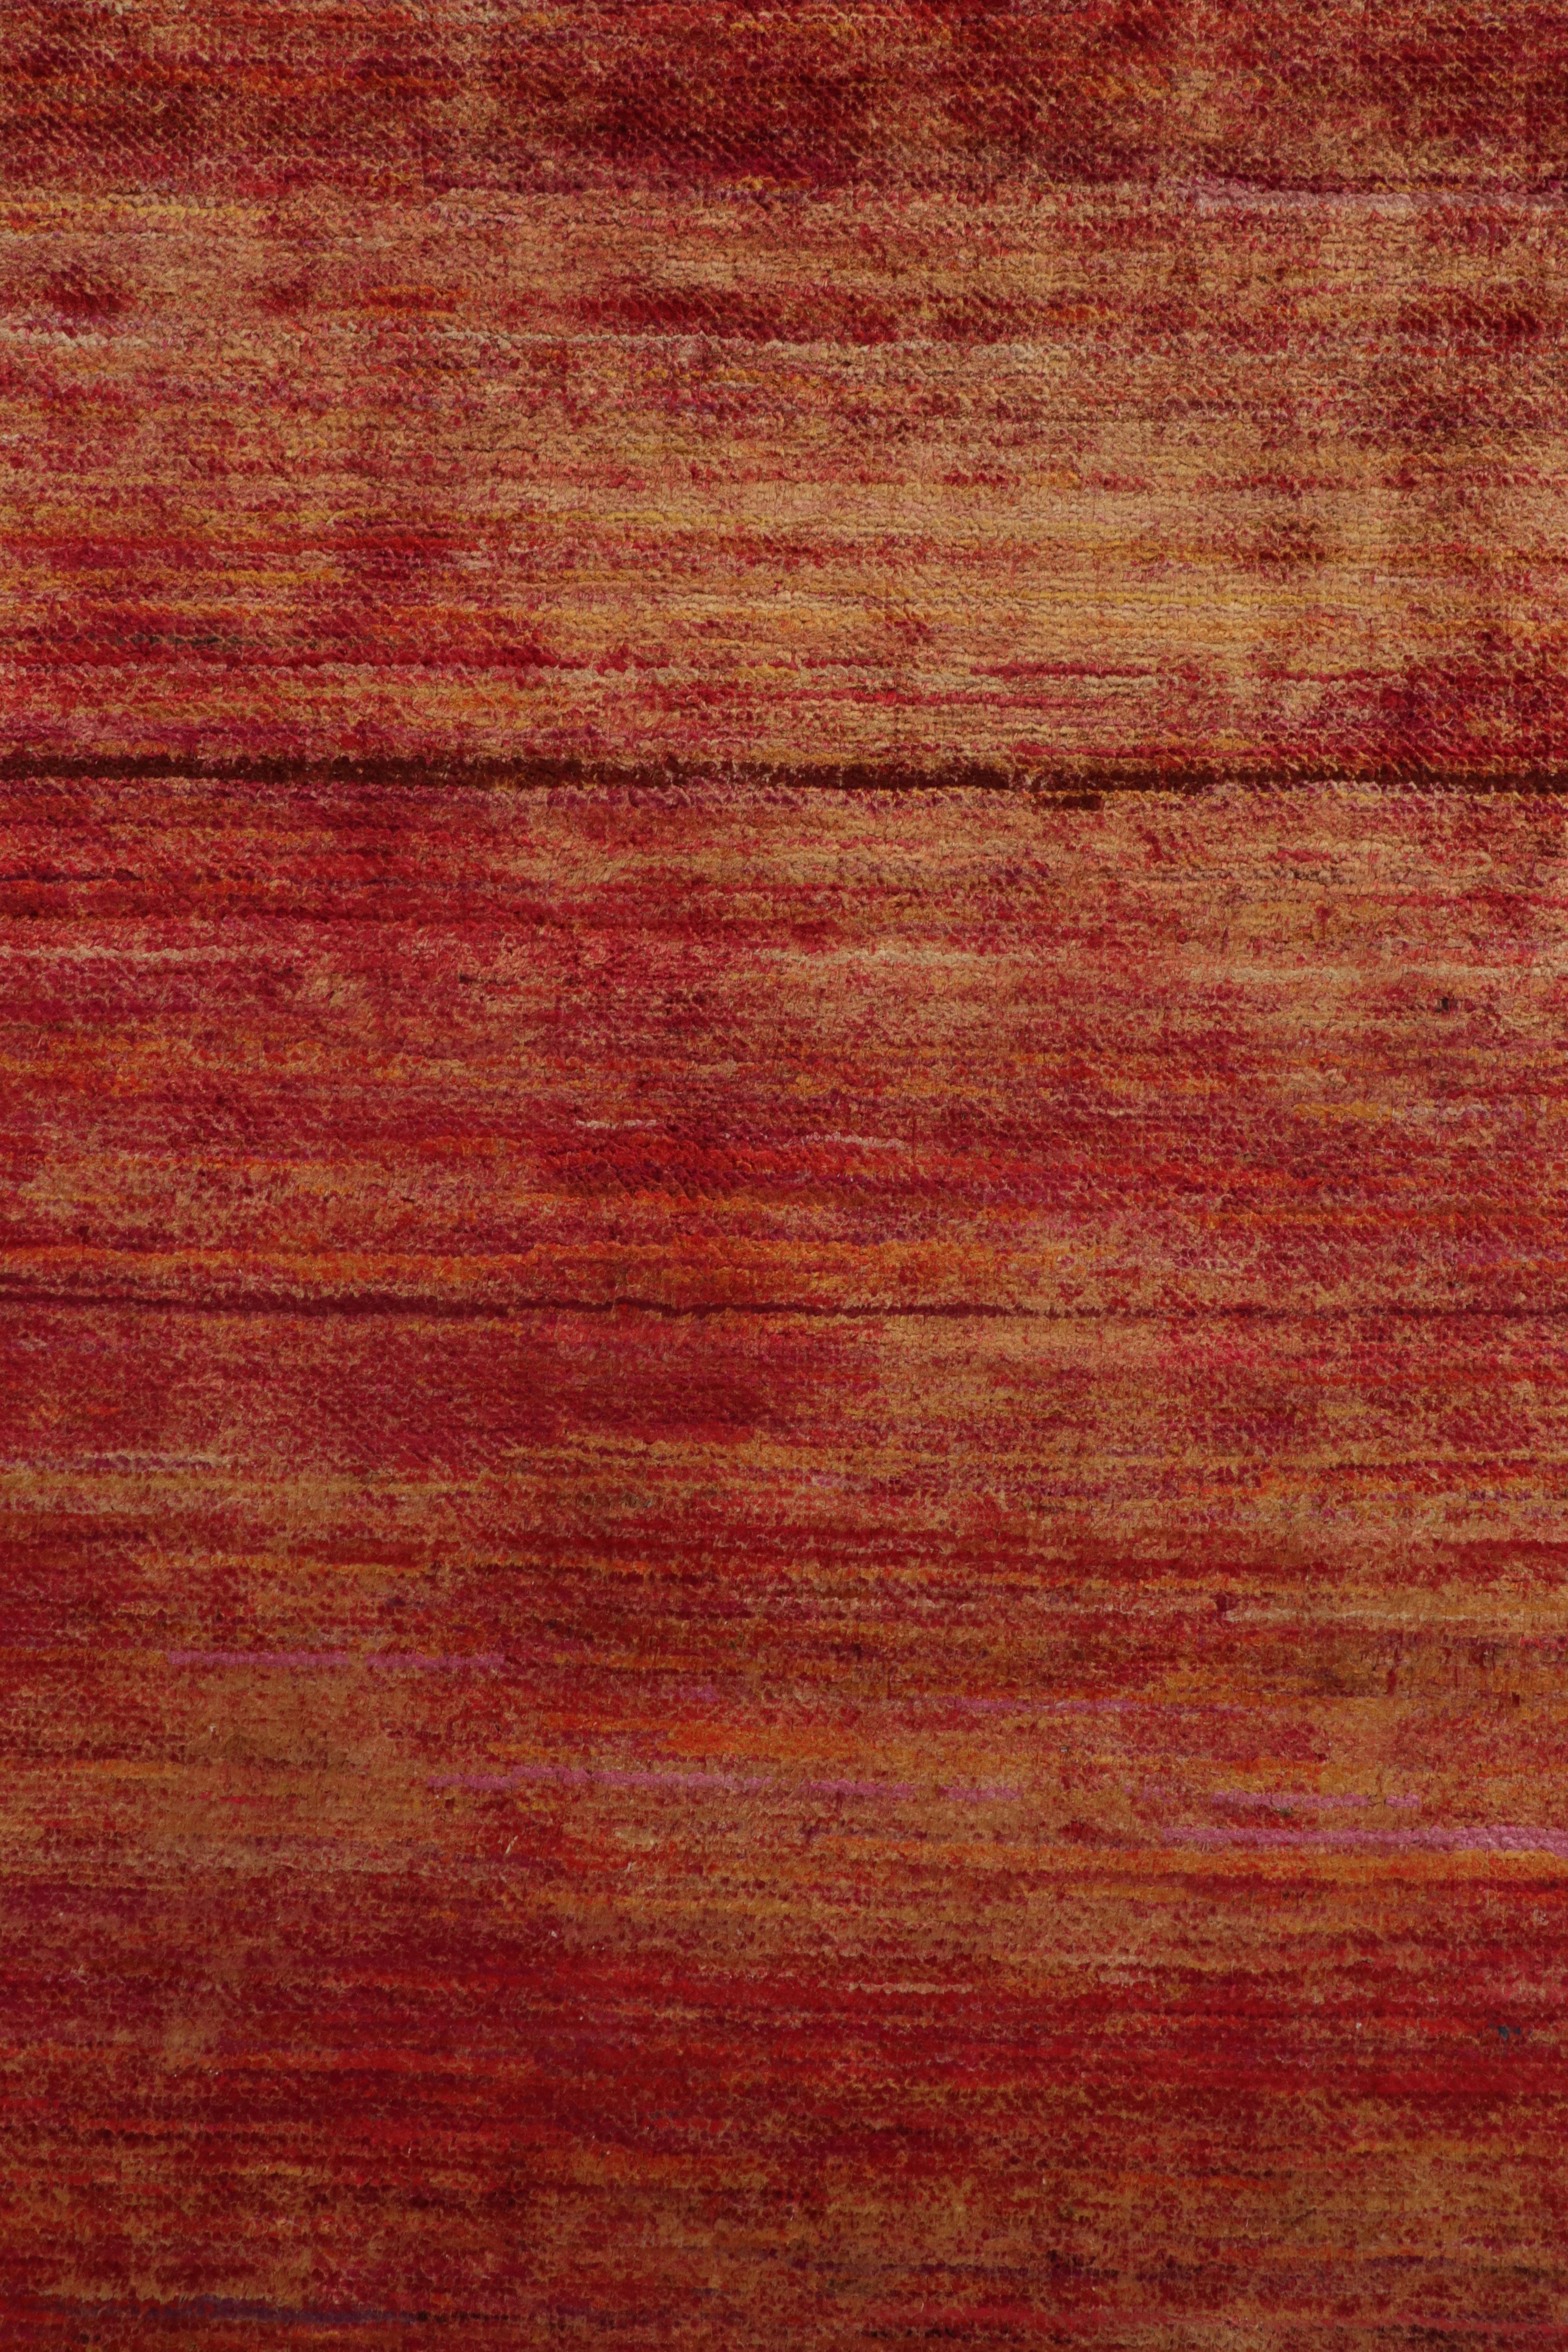 Rug & Kilim’s Modern Textural Rug in Red and Gold Tones and Striae